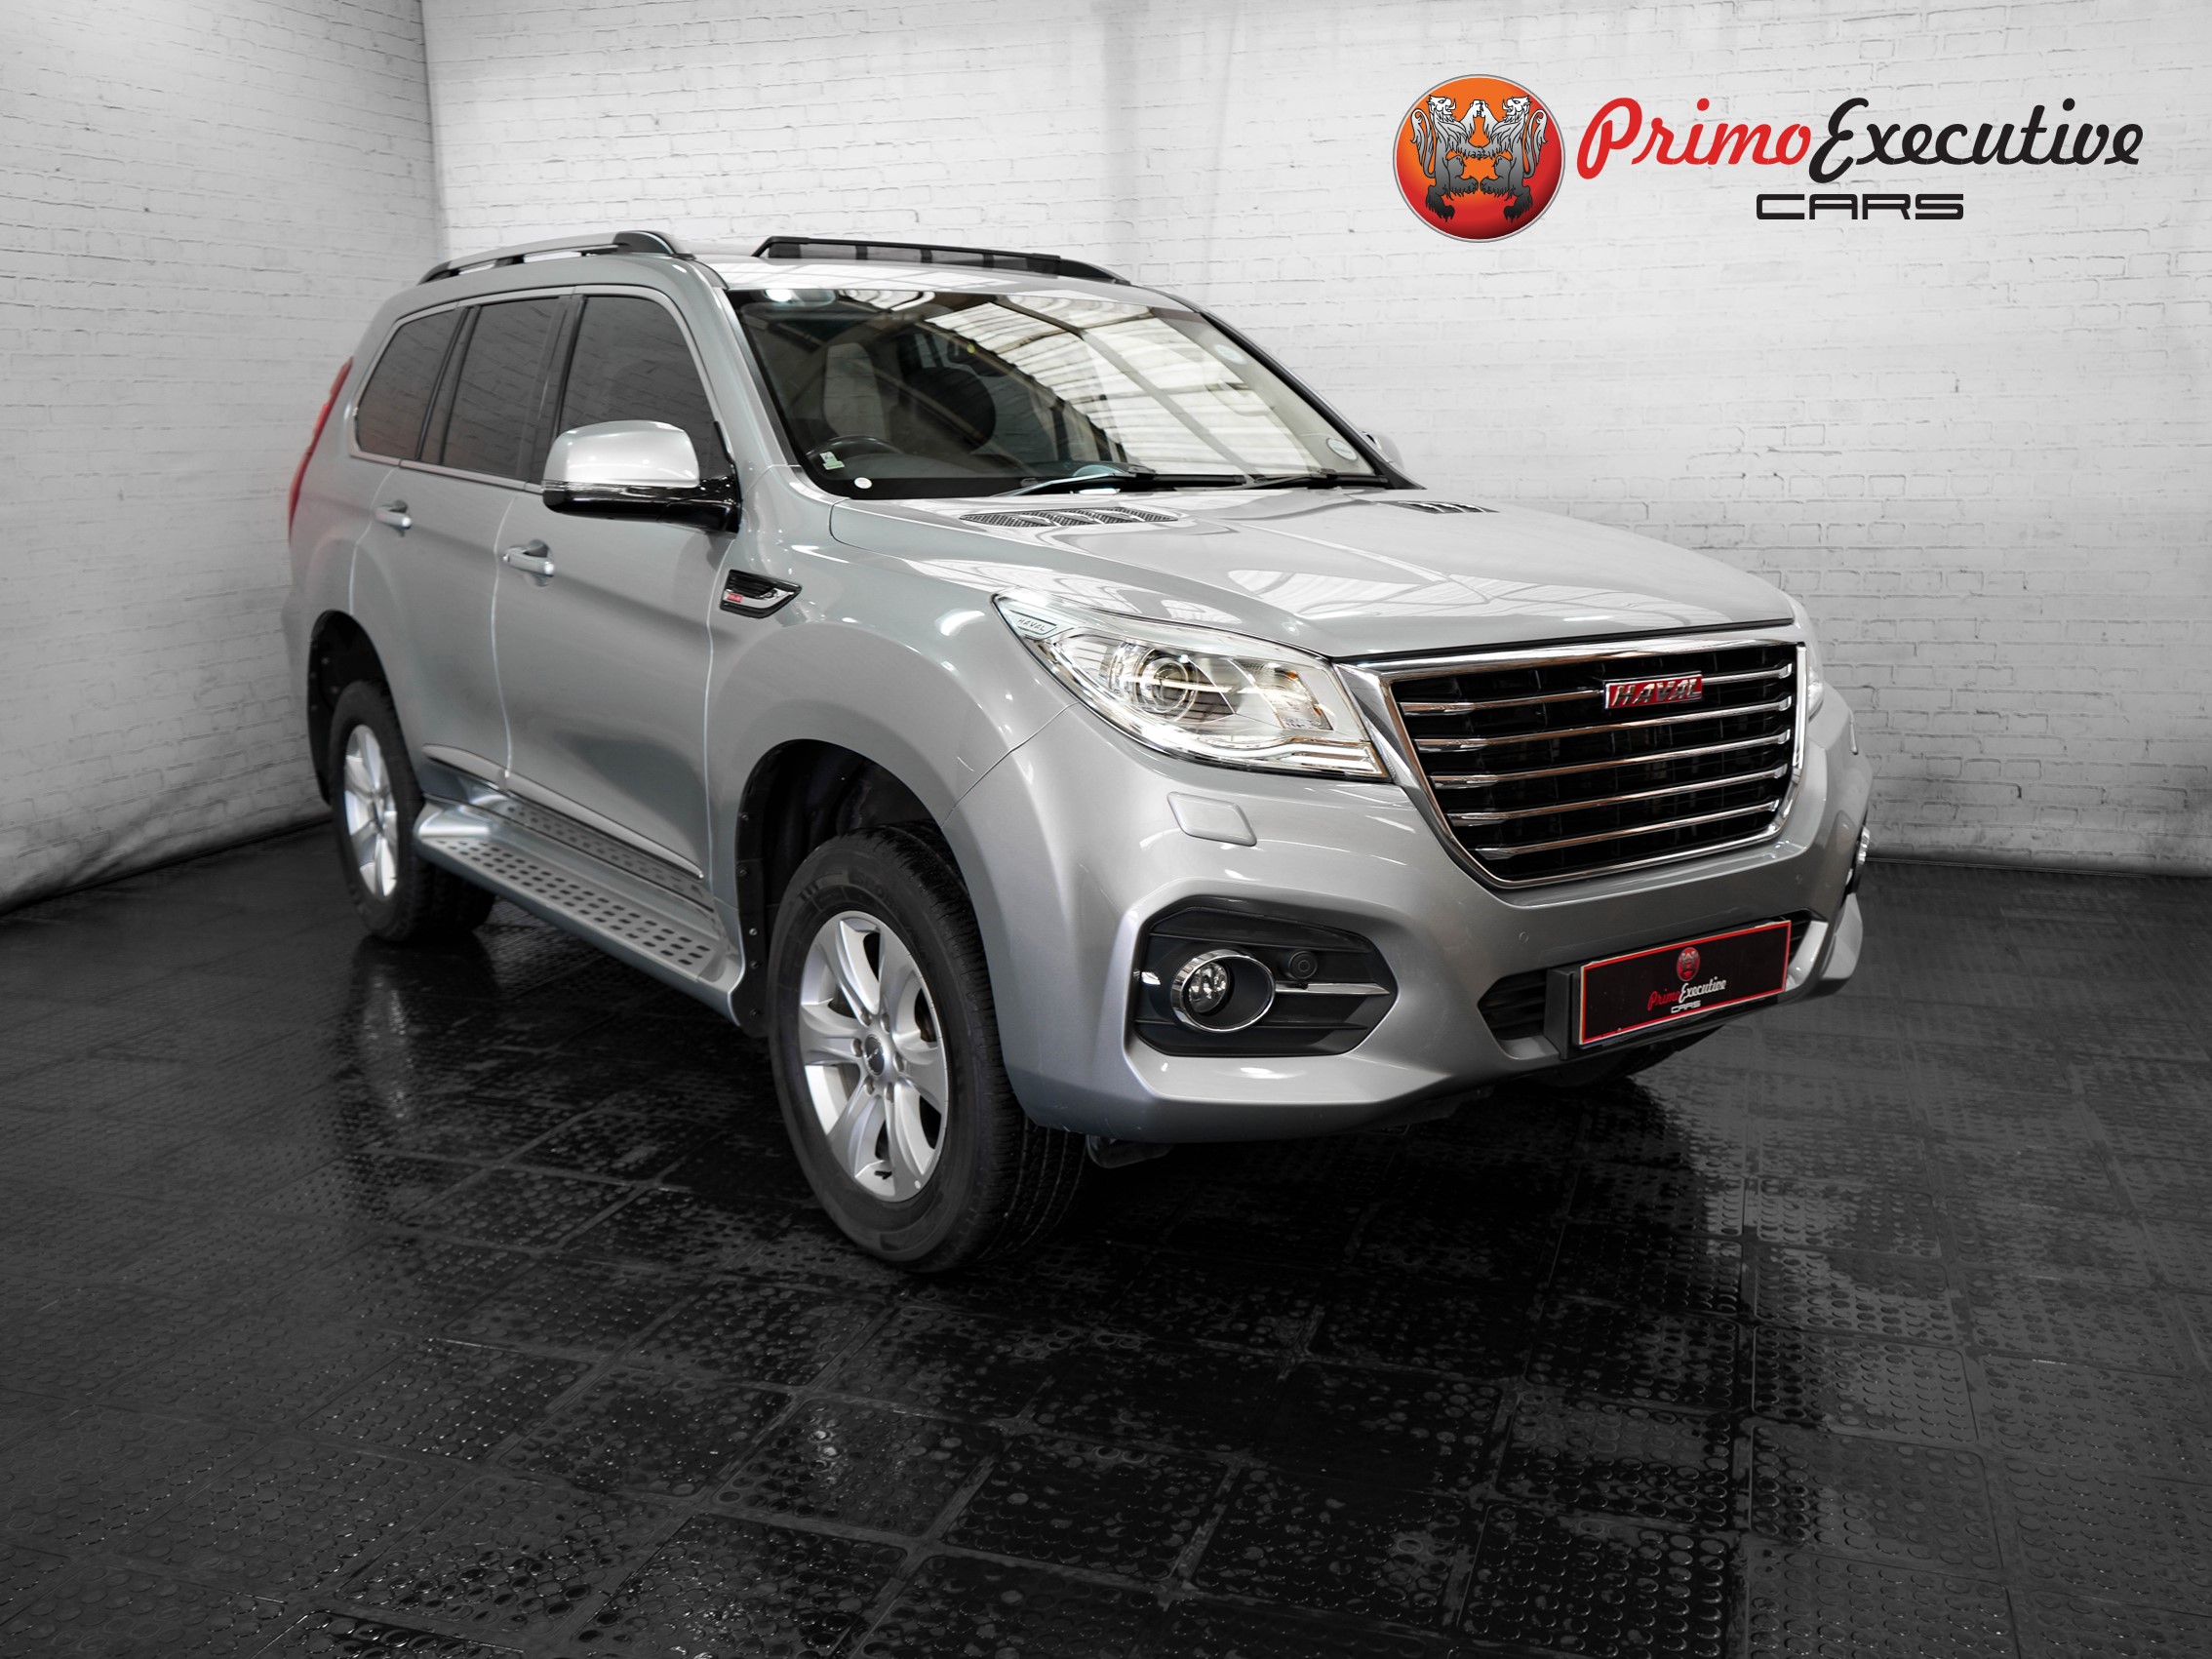 2019 Haval H9  for sale - 510466